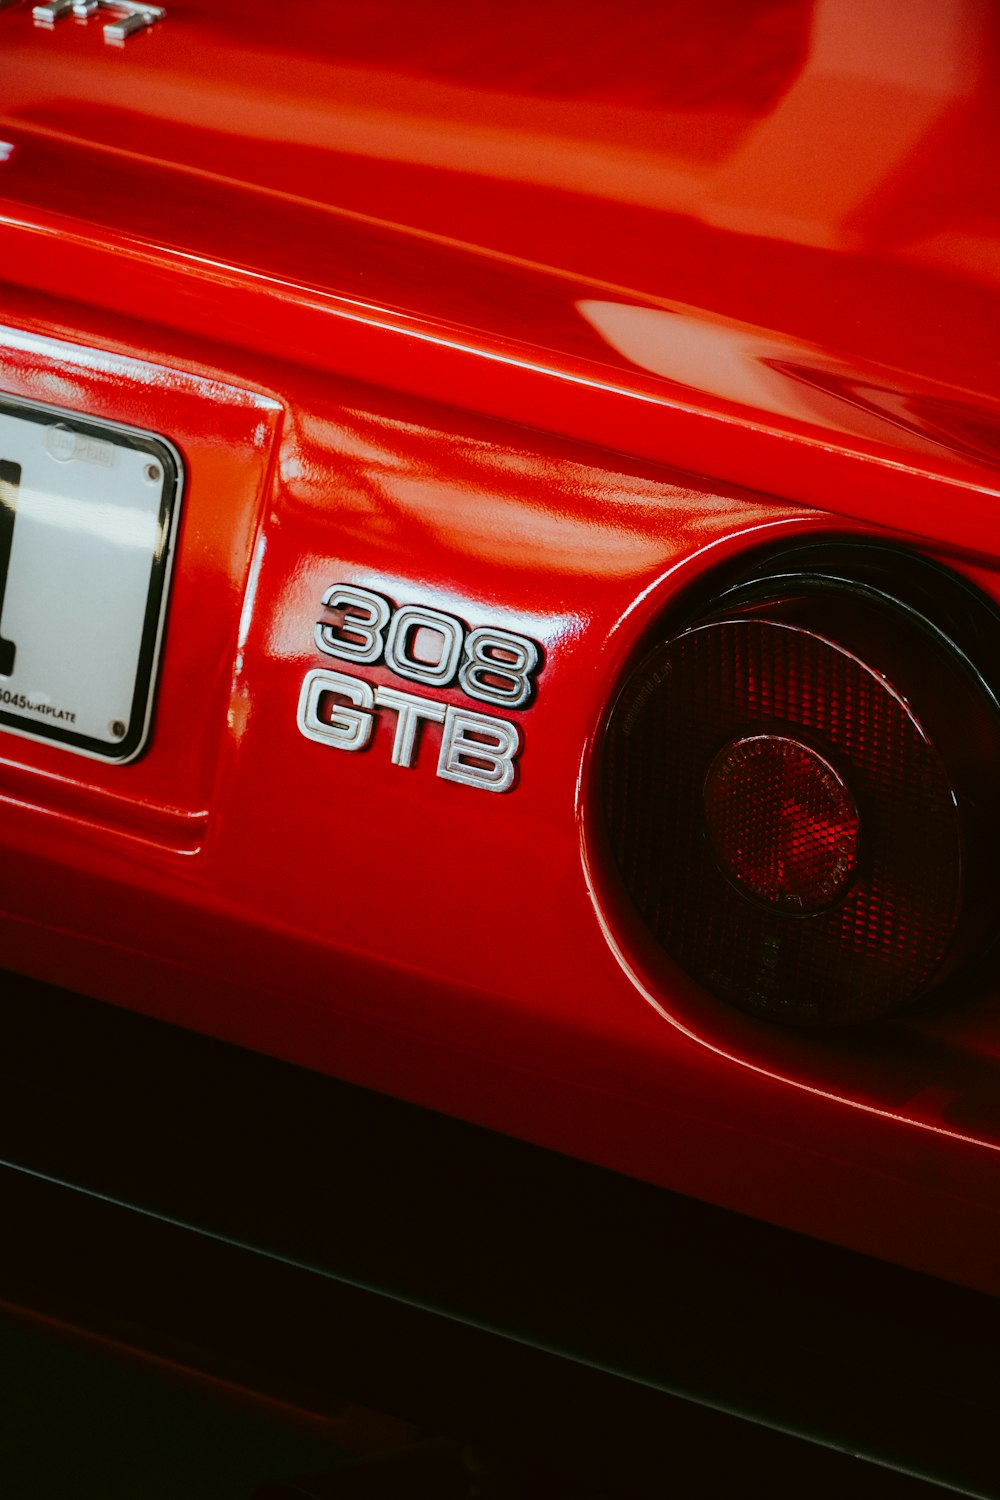 a close up of a red car with a number plate